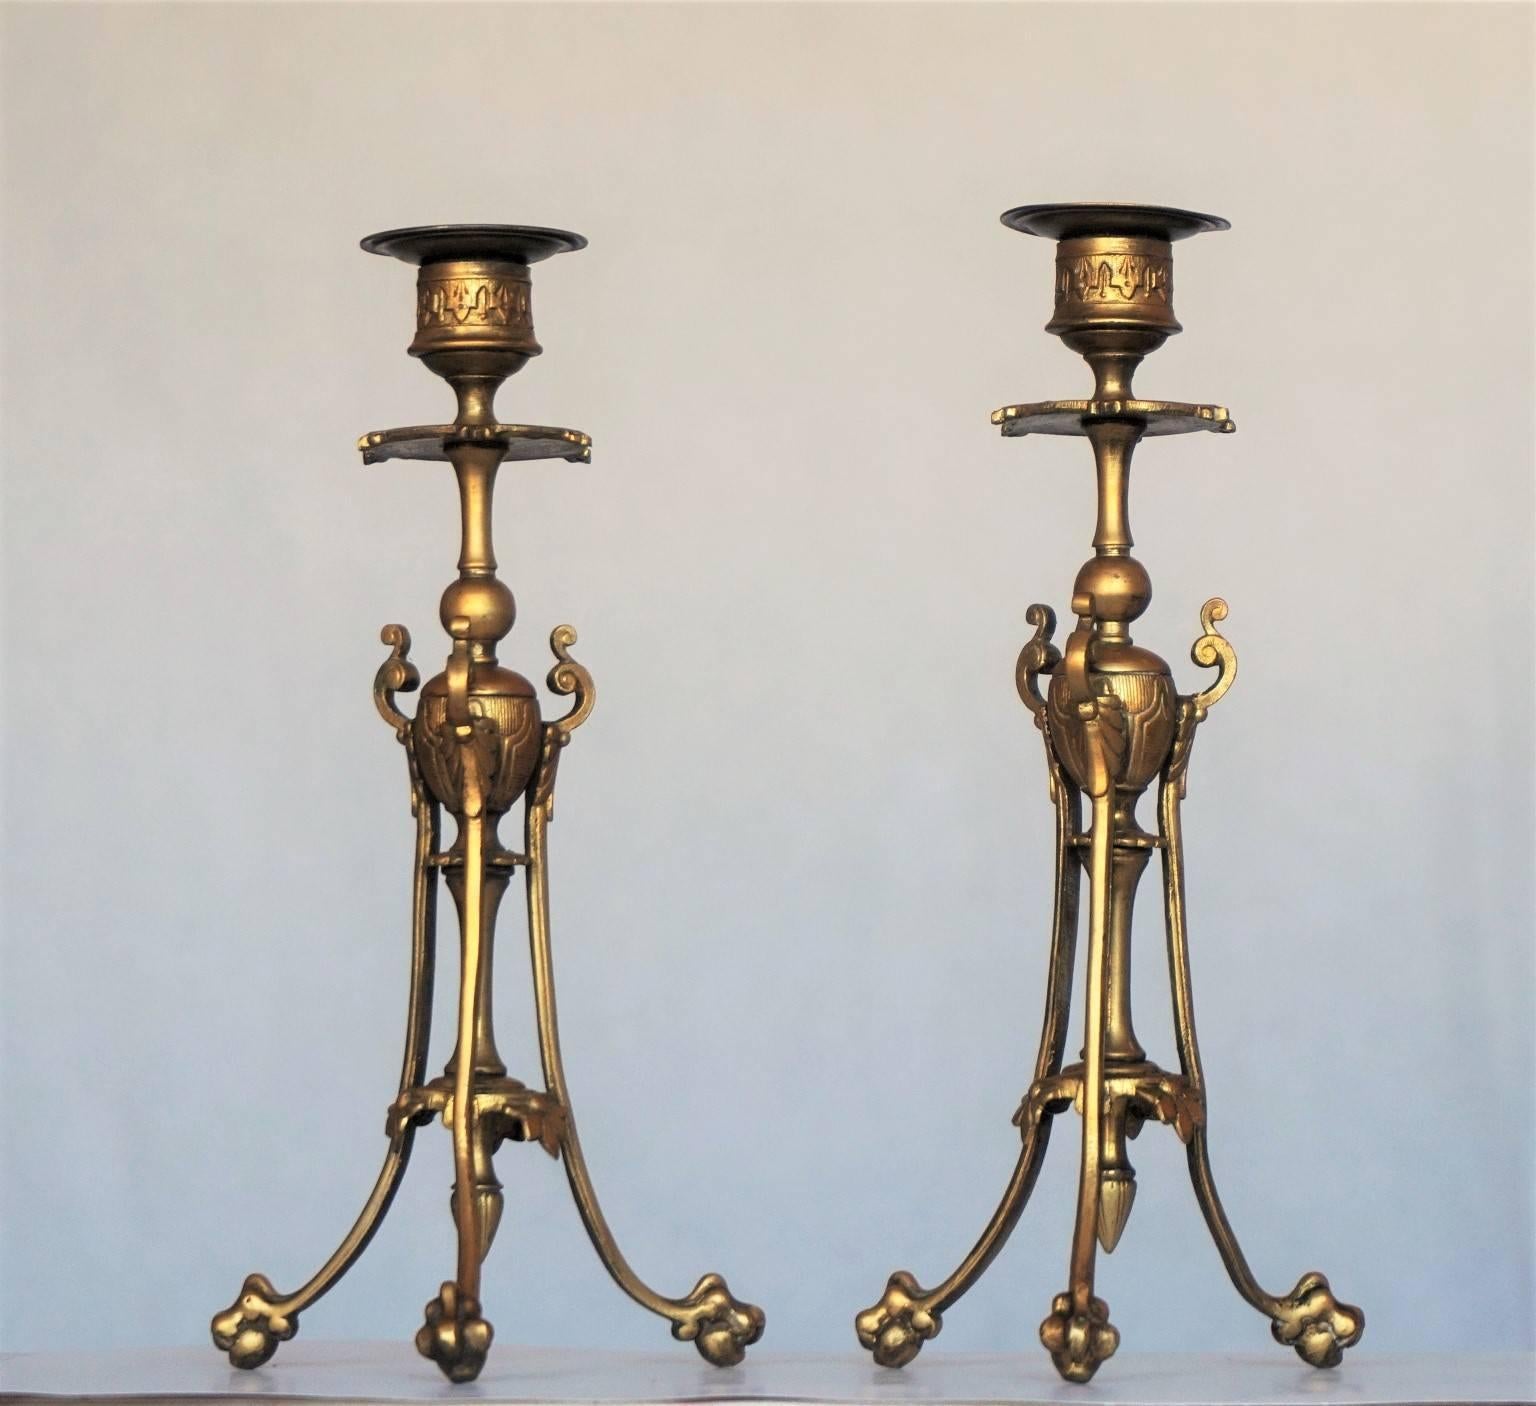 Mid-19th Century Pair of French Empire Style Gilt Bronze Candleholders In Good Condition For Sale In Frankfurt am Main, DE